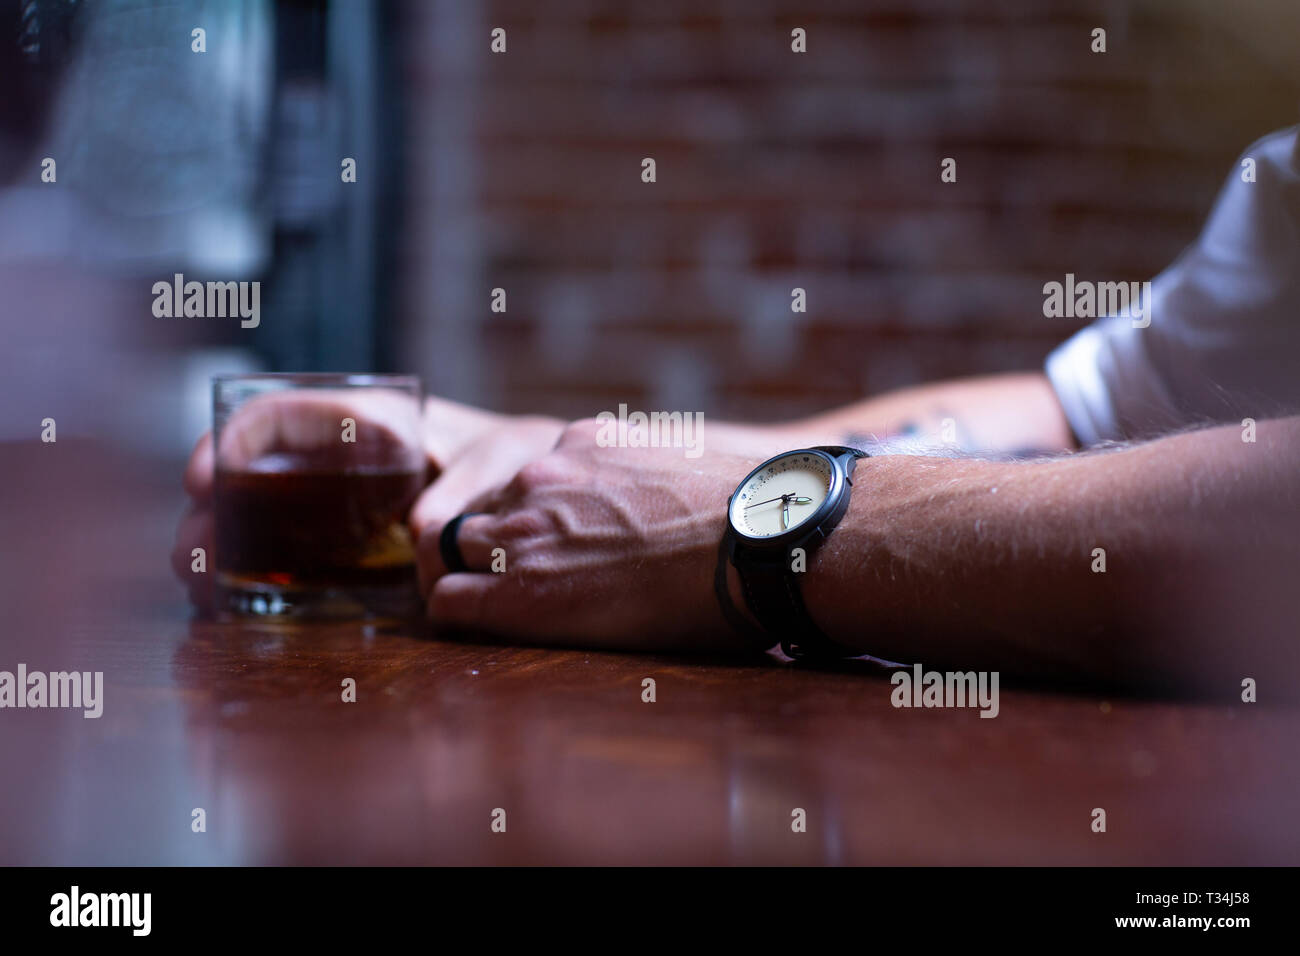 Man sitting at the bar drinking a glass of whisky Stock Photo